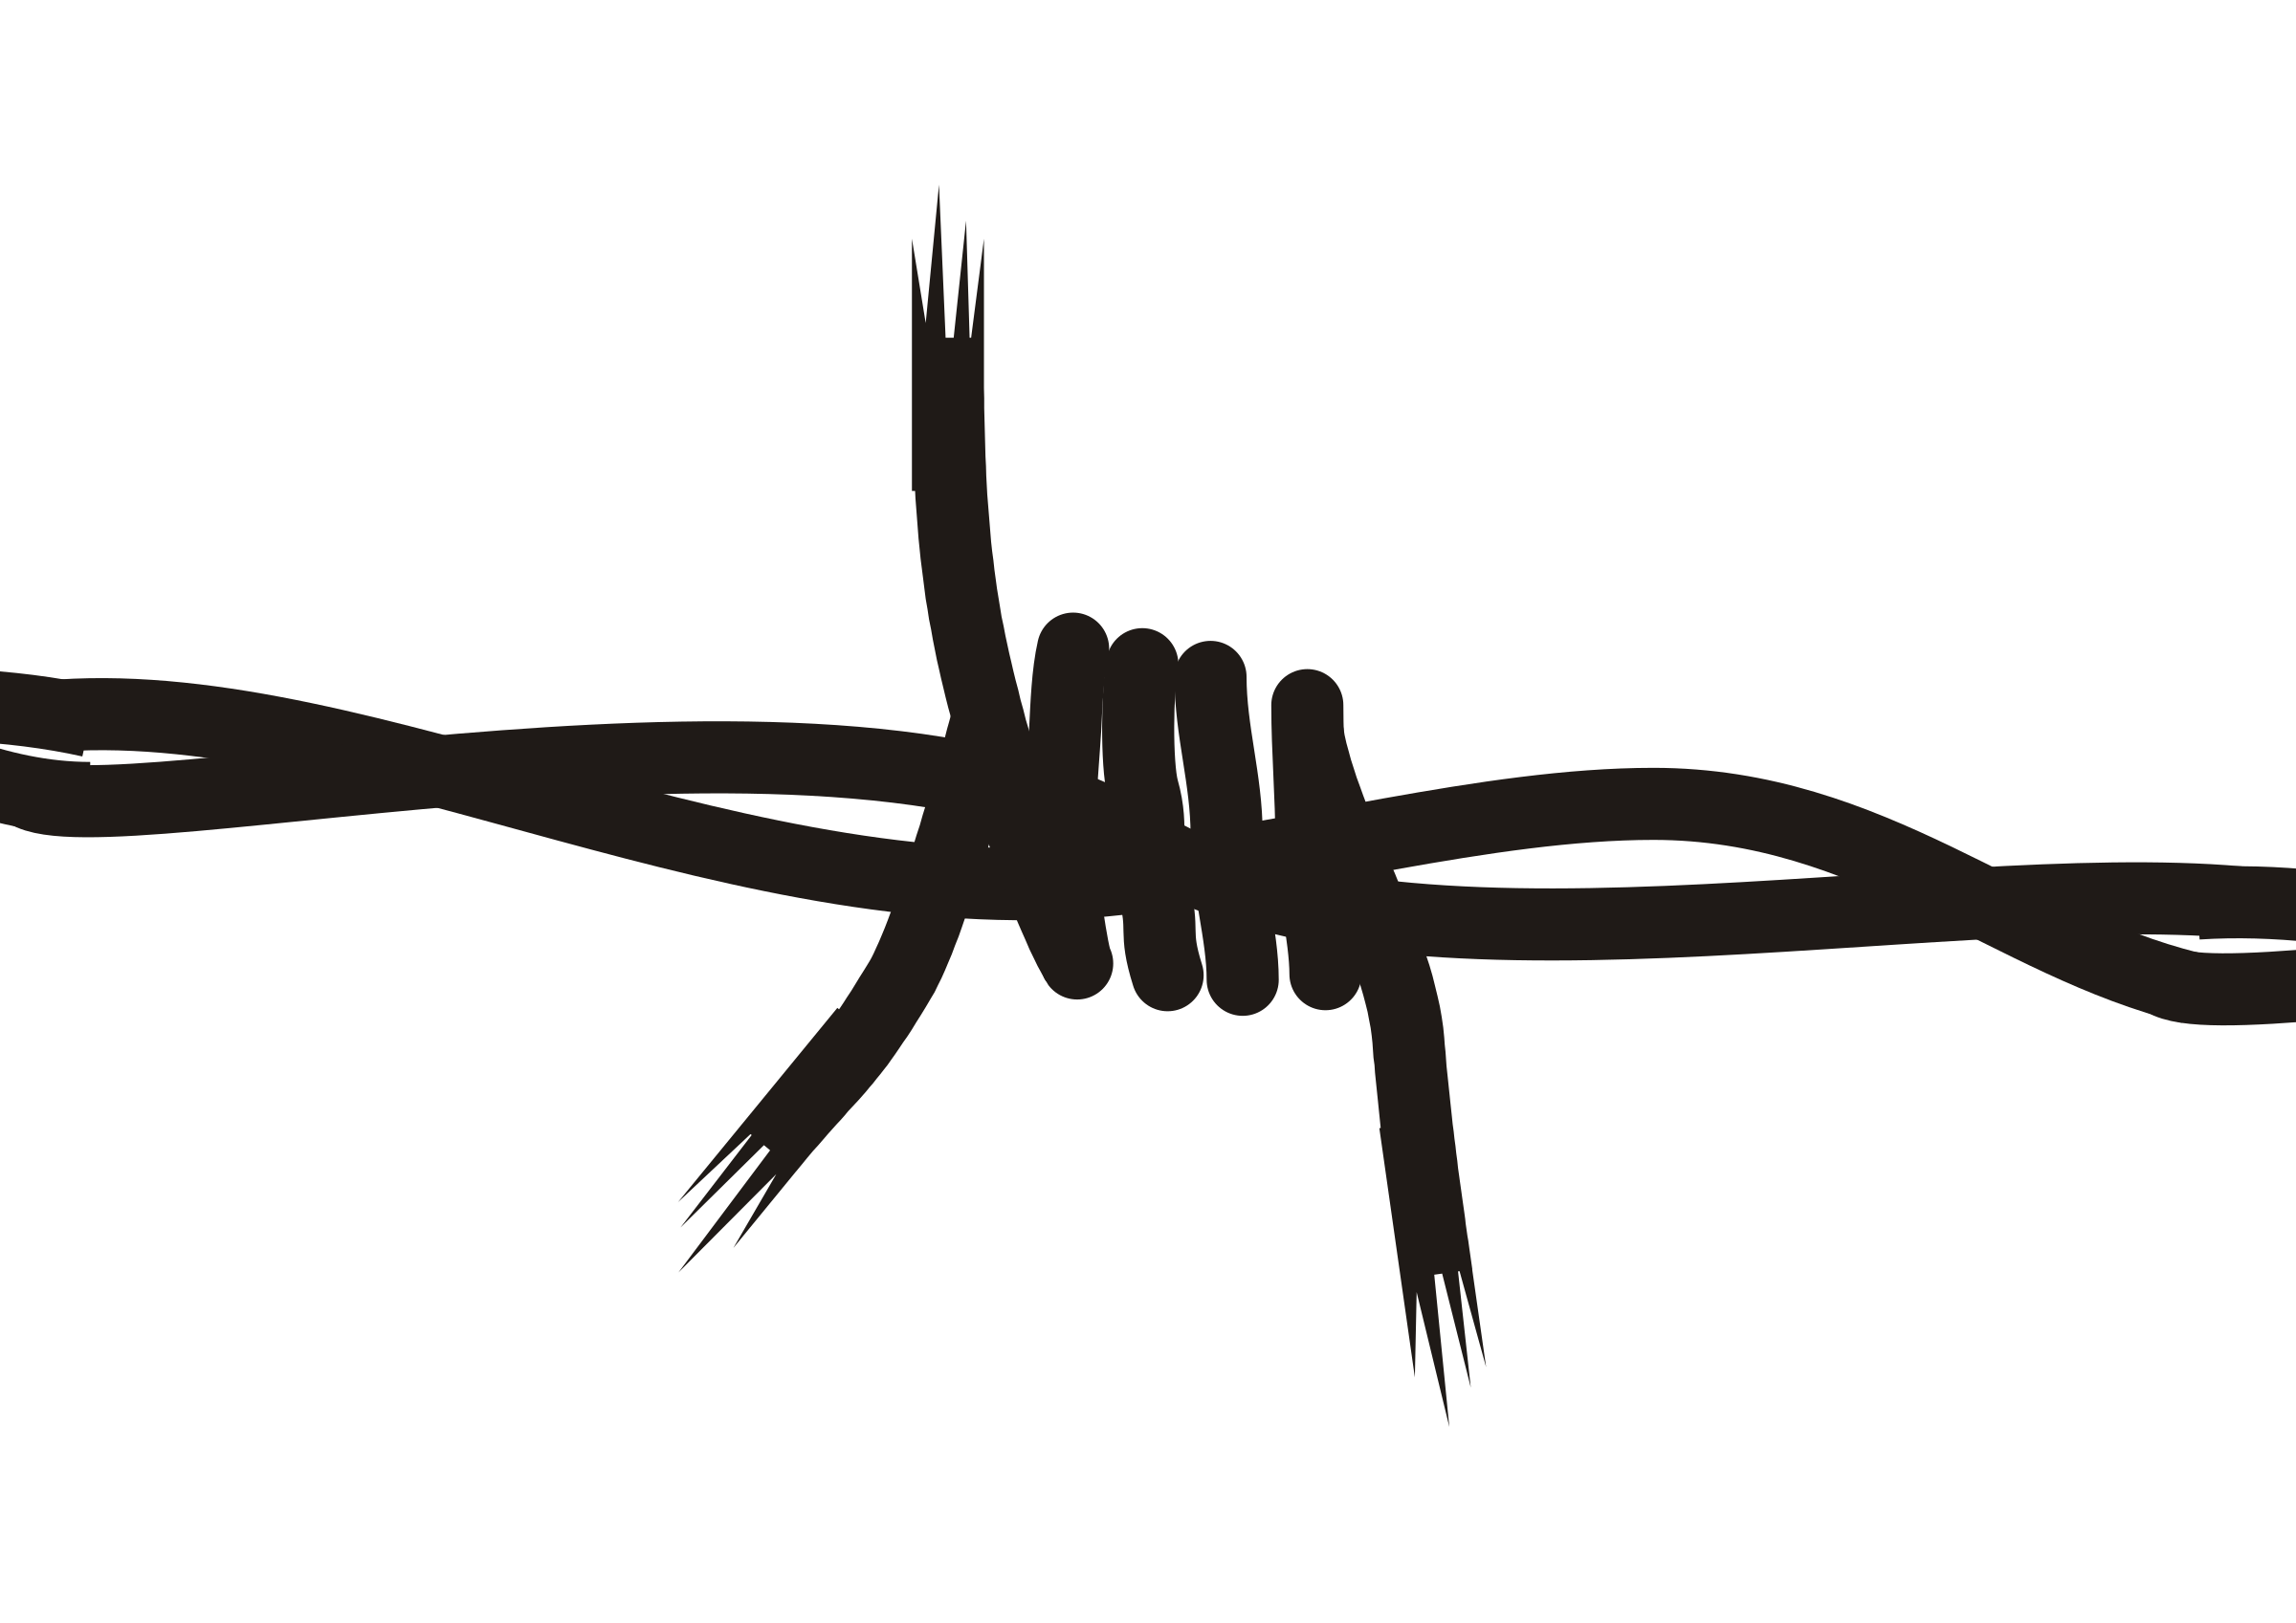 Barbed Wire Clipart